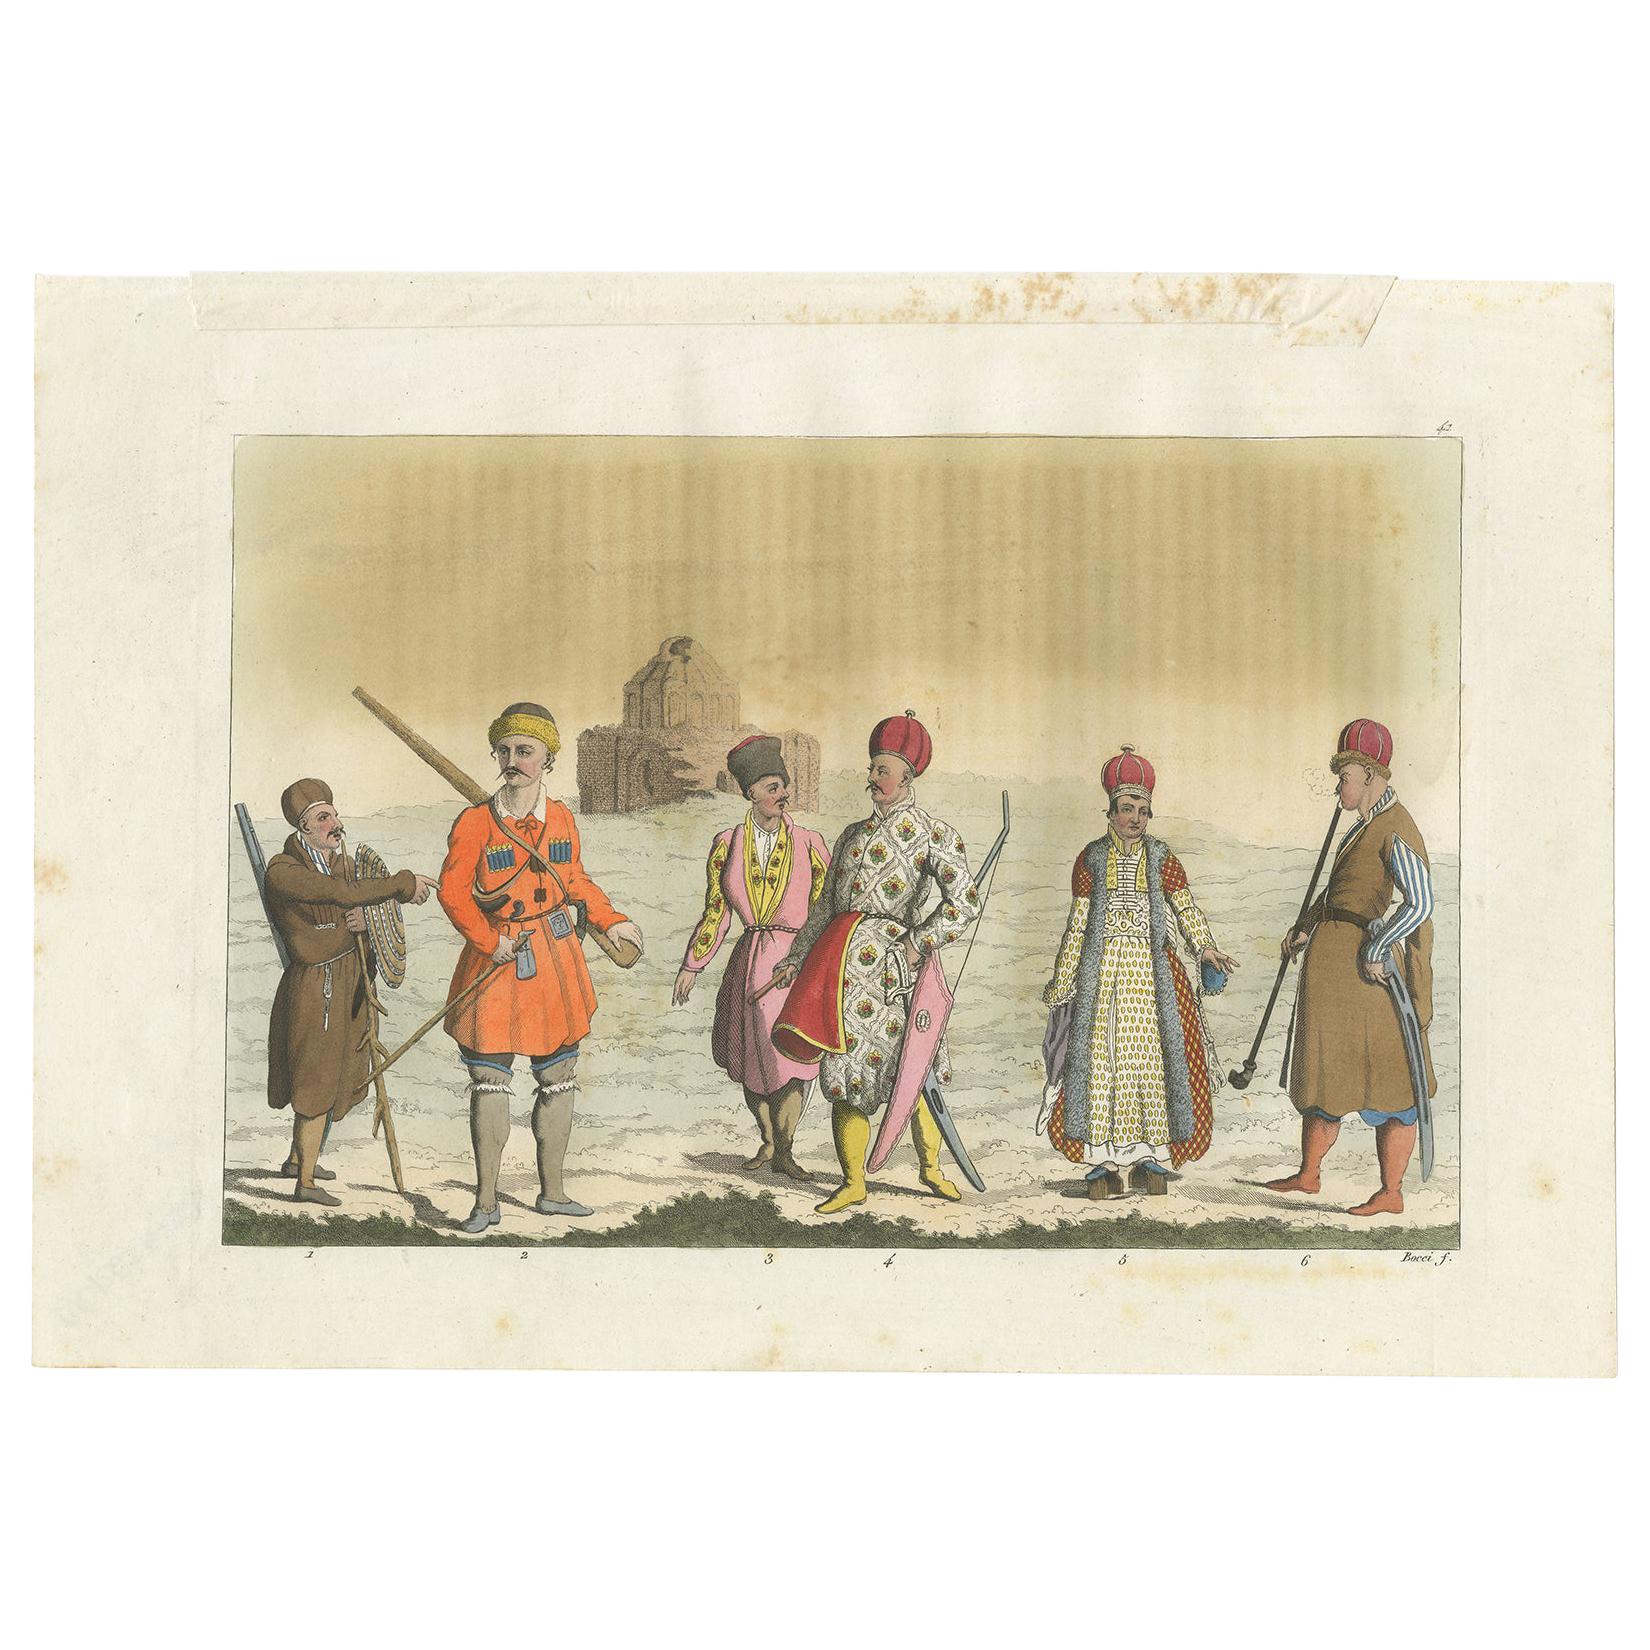 Antique Print of Ingush and Other People by Ferrario '1831'